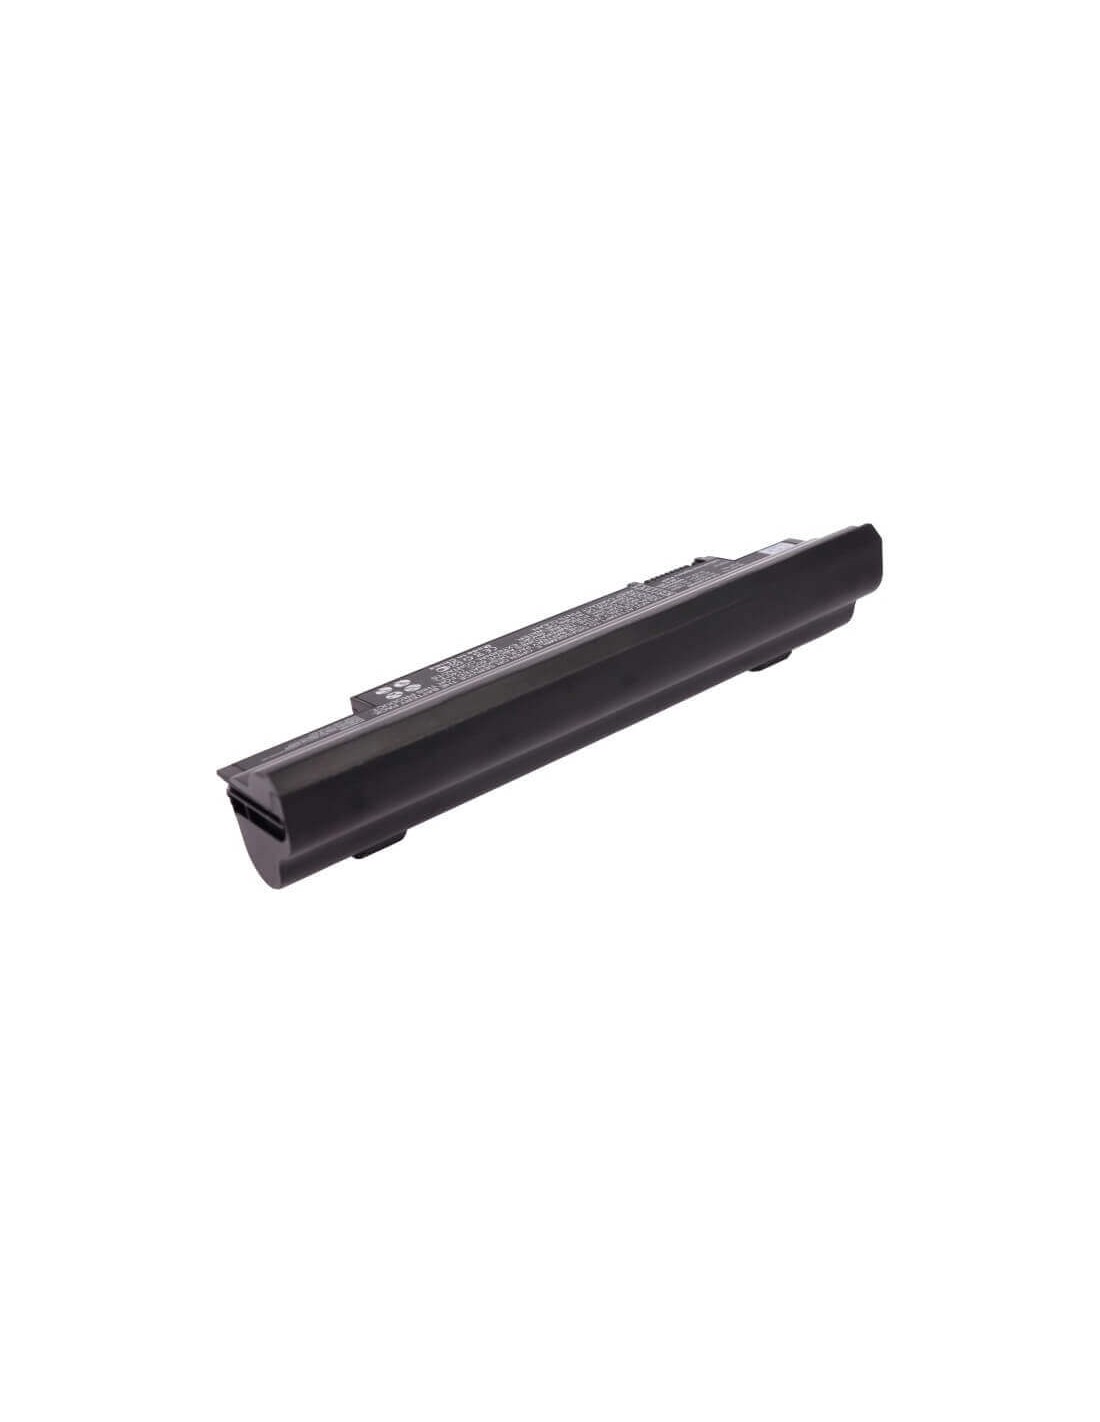 Black Battery for Acer Aspire One D255, Aspire One D260, One D260-2028 11.1V, 4400mAh - 48.84Wh